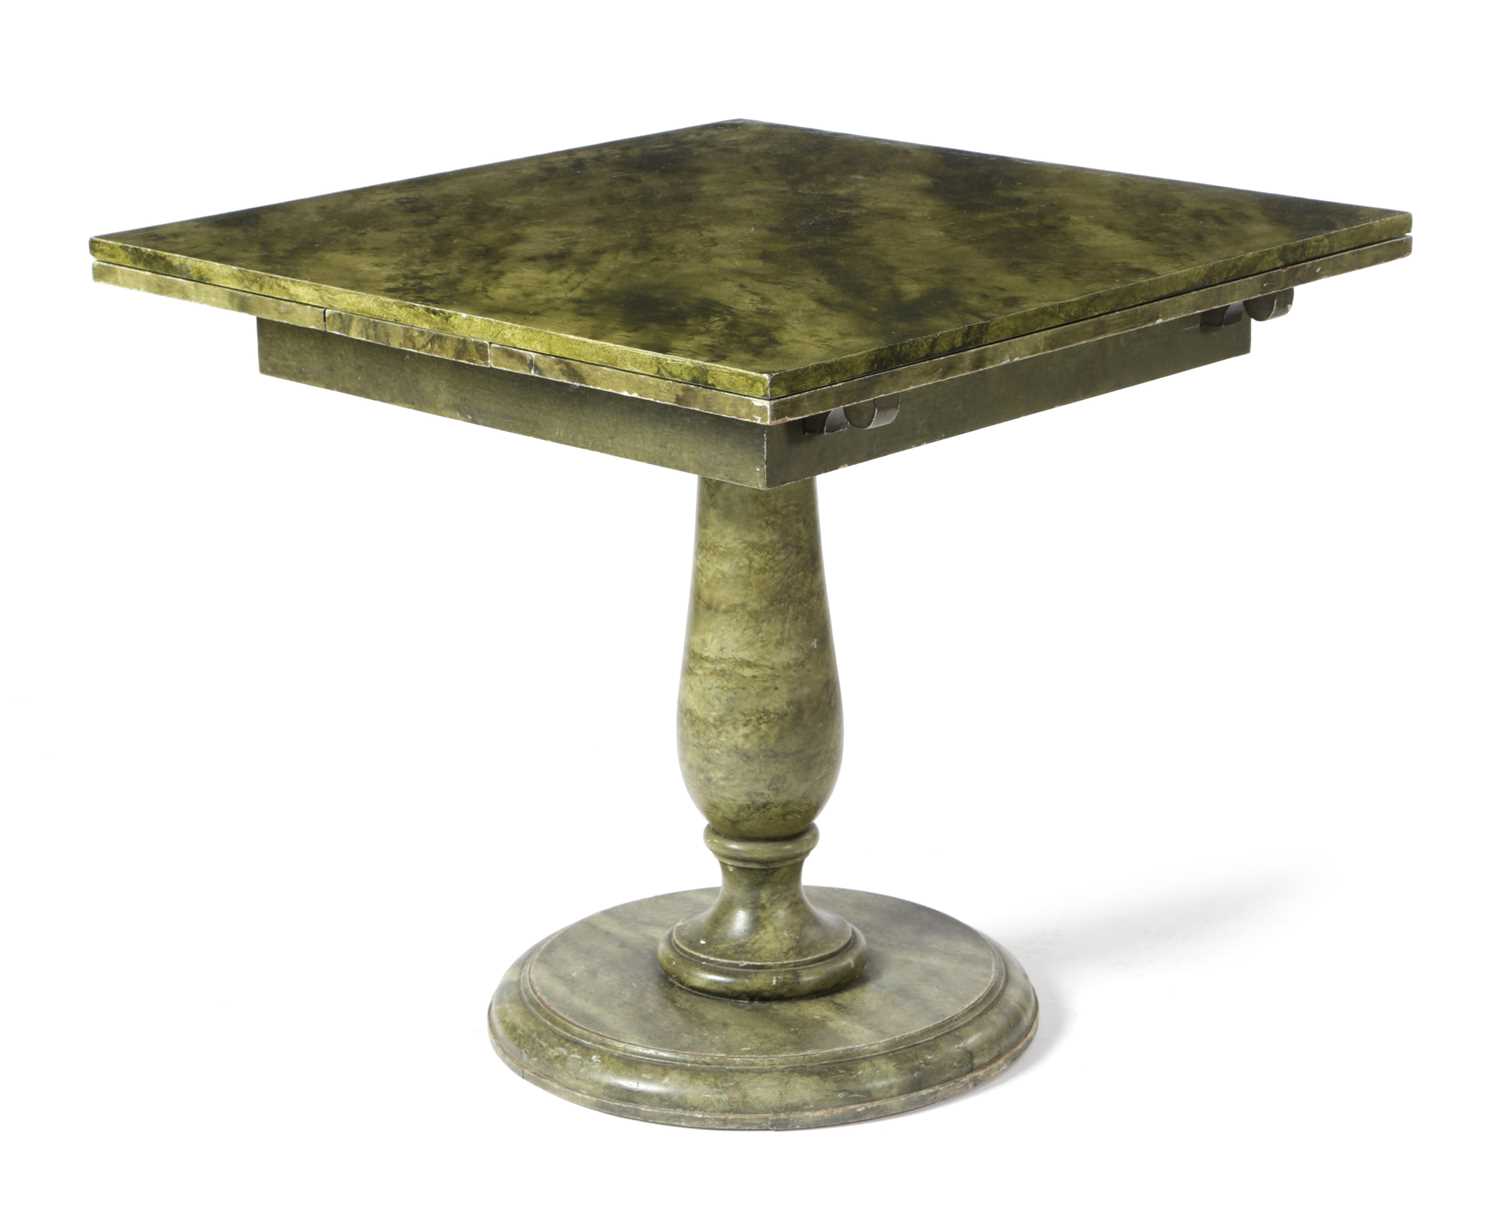 A RARE GREEN PAINTED FAUX MARBLE DRAW-LEAF DINING TABLE ATTRIBUTED TO JOHN FOWLER, C.1950-60 the